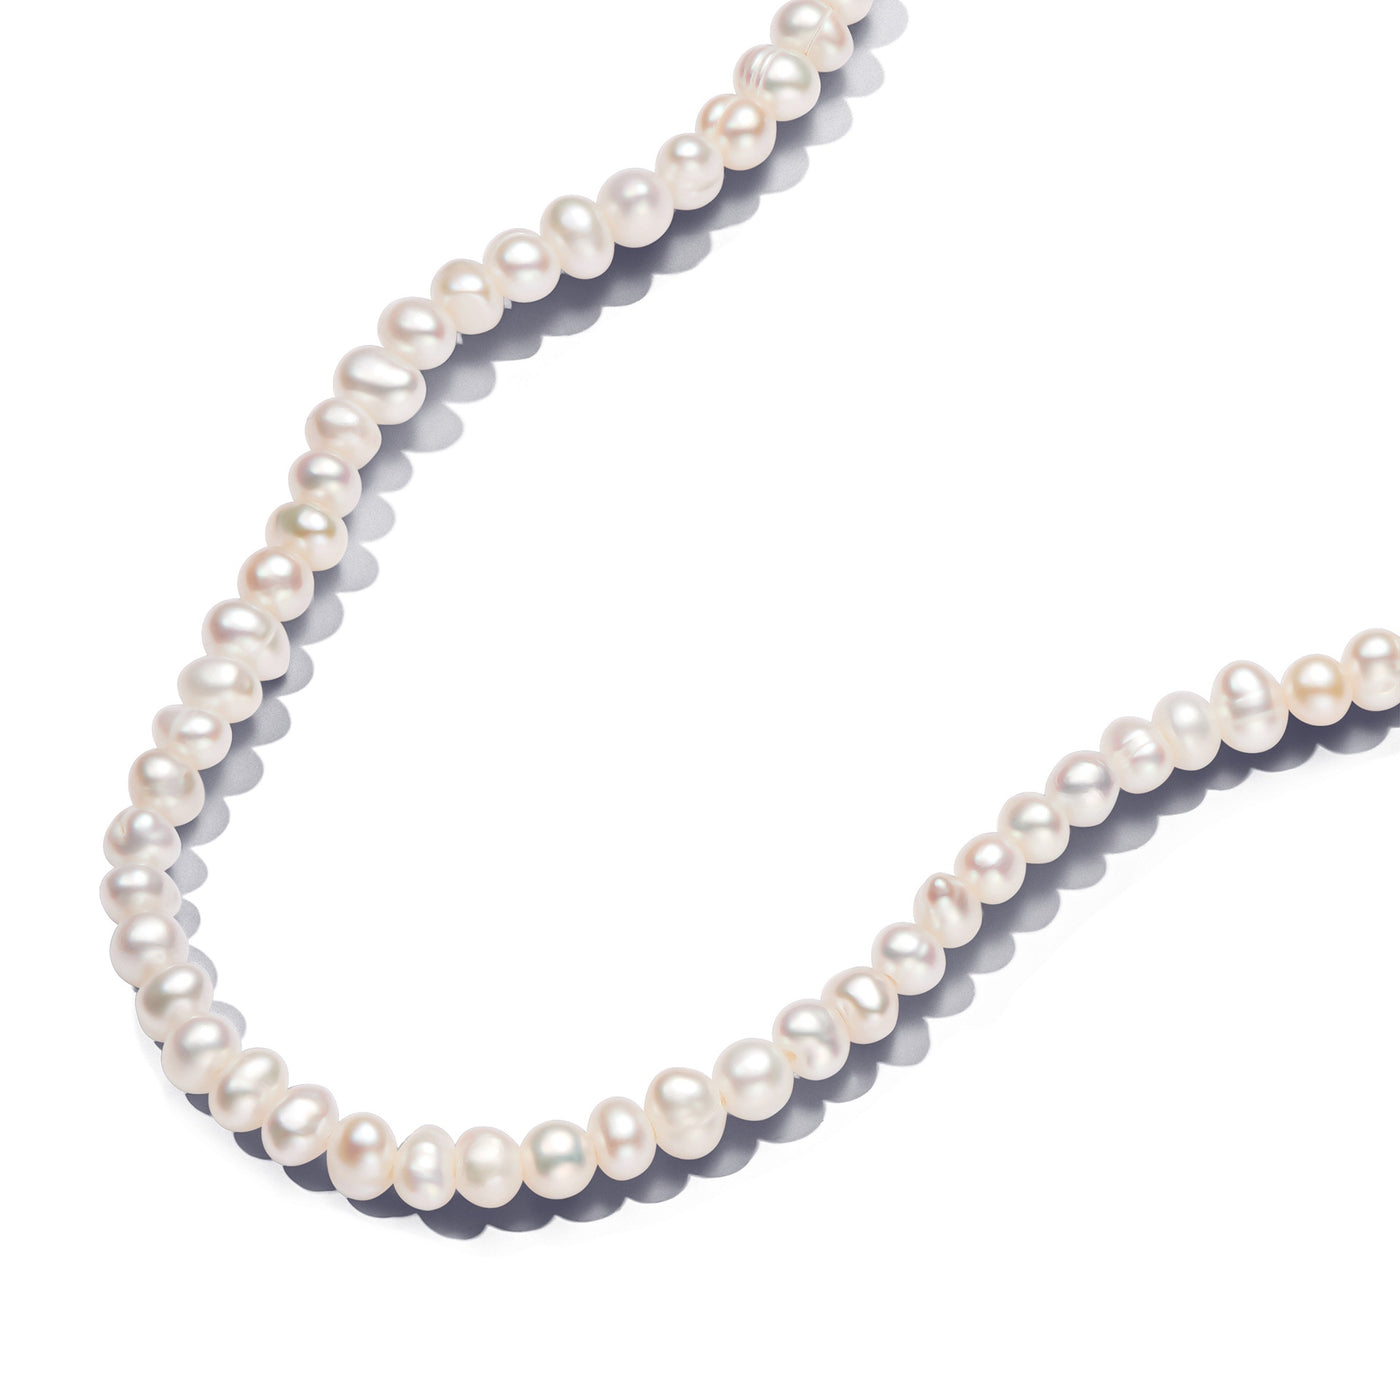 Pandora Treated Freshwater Cultured Pearls T-bar Collier Necklace